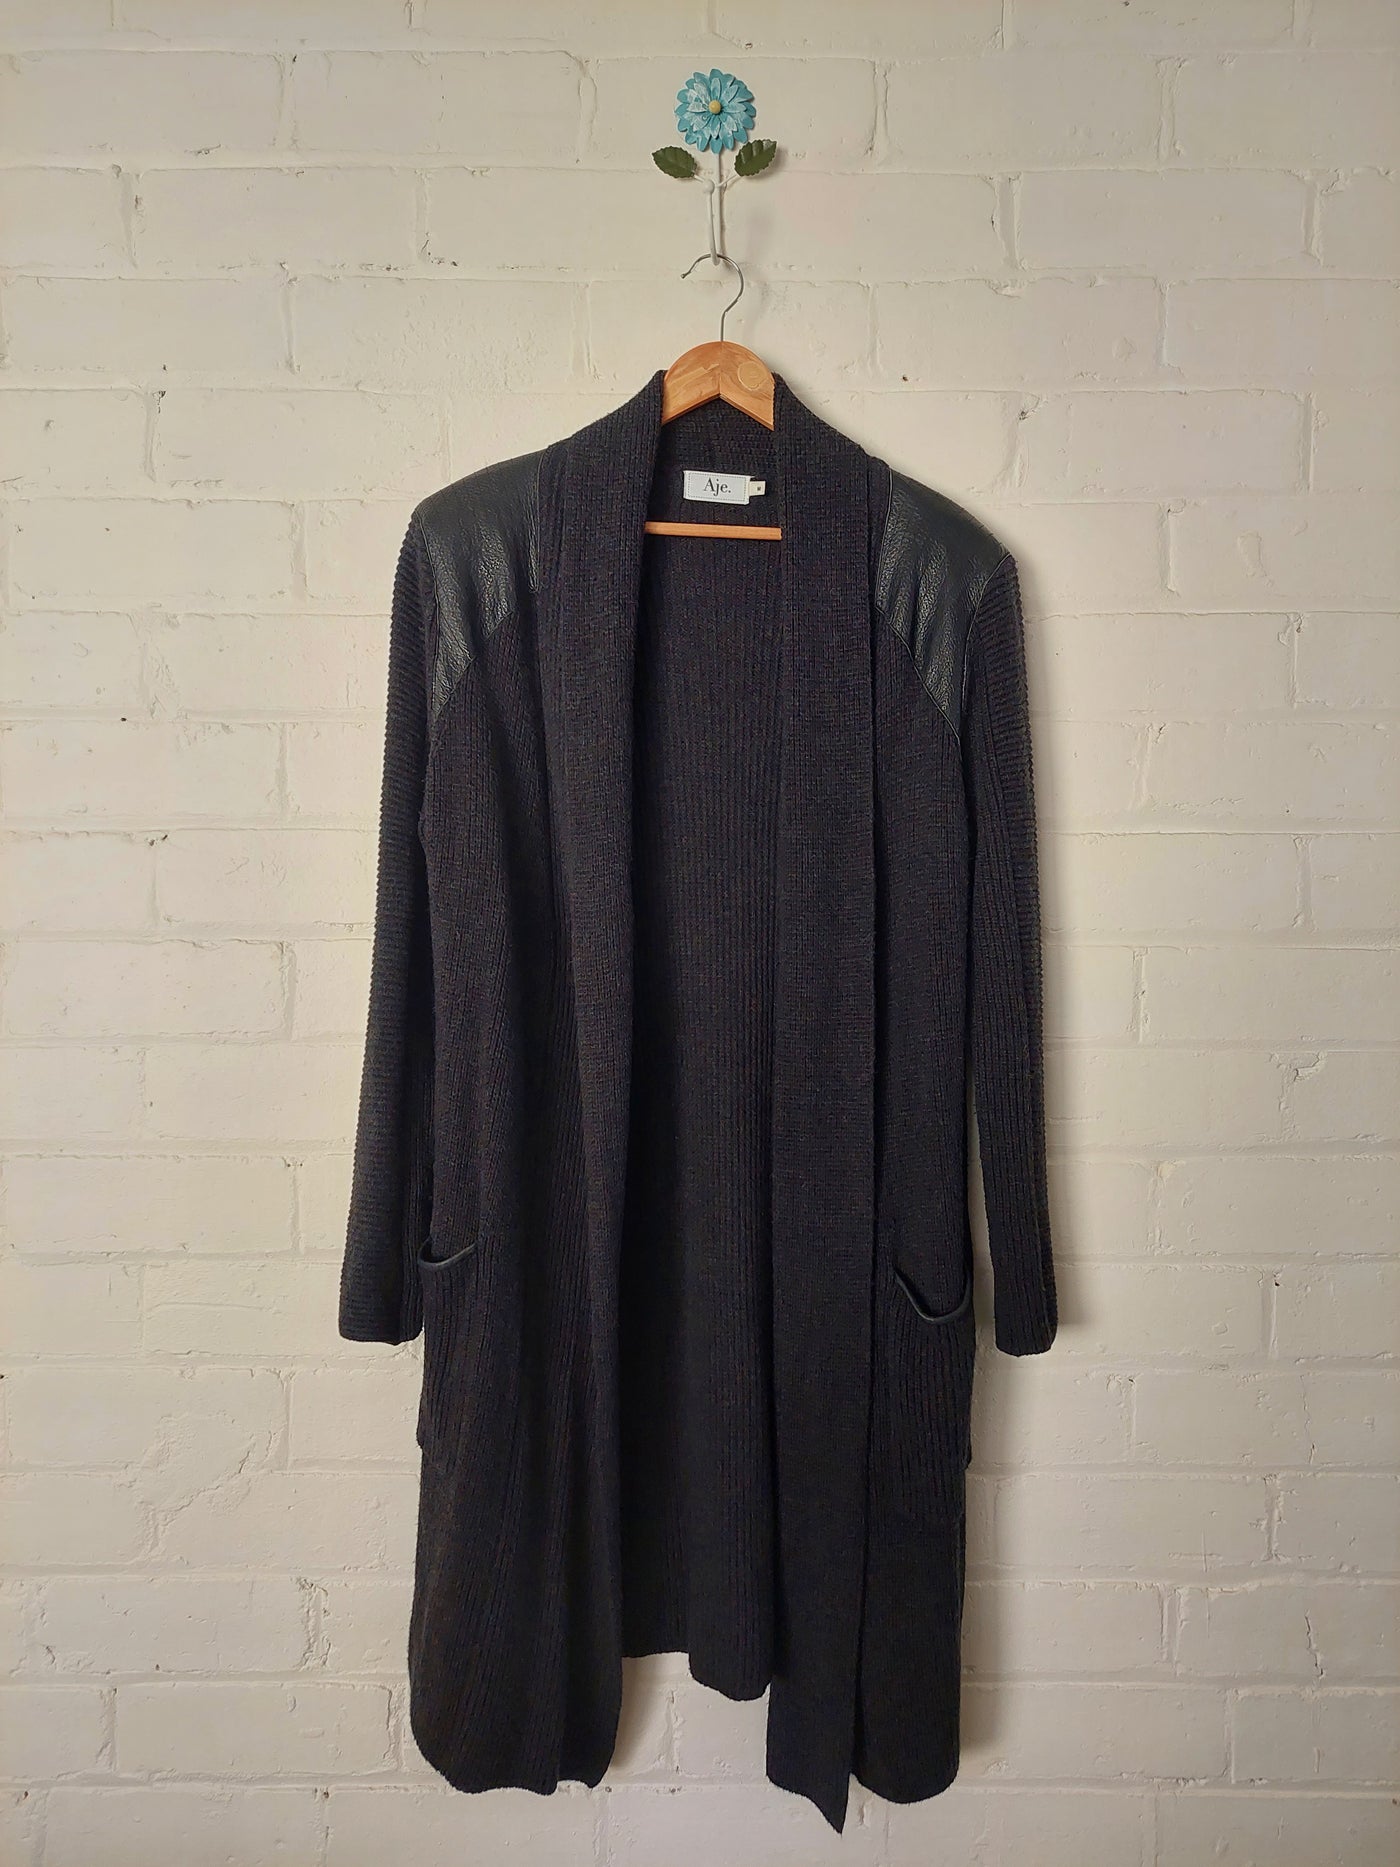 Aje soft wool / cotton blend long cardigan with pockets, Size M-L